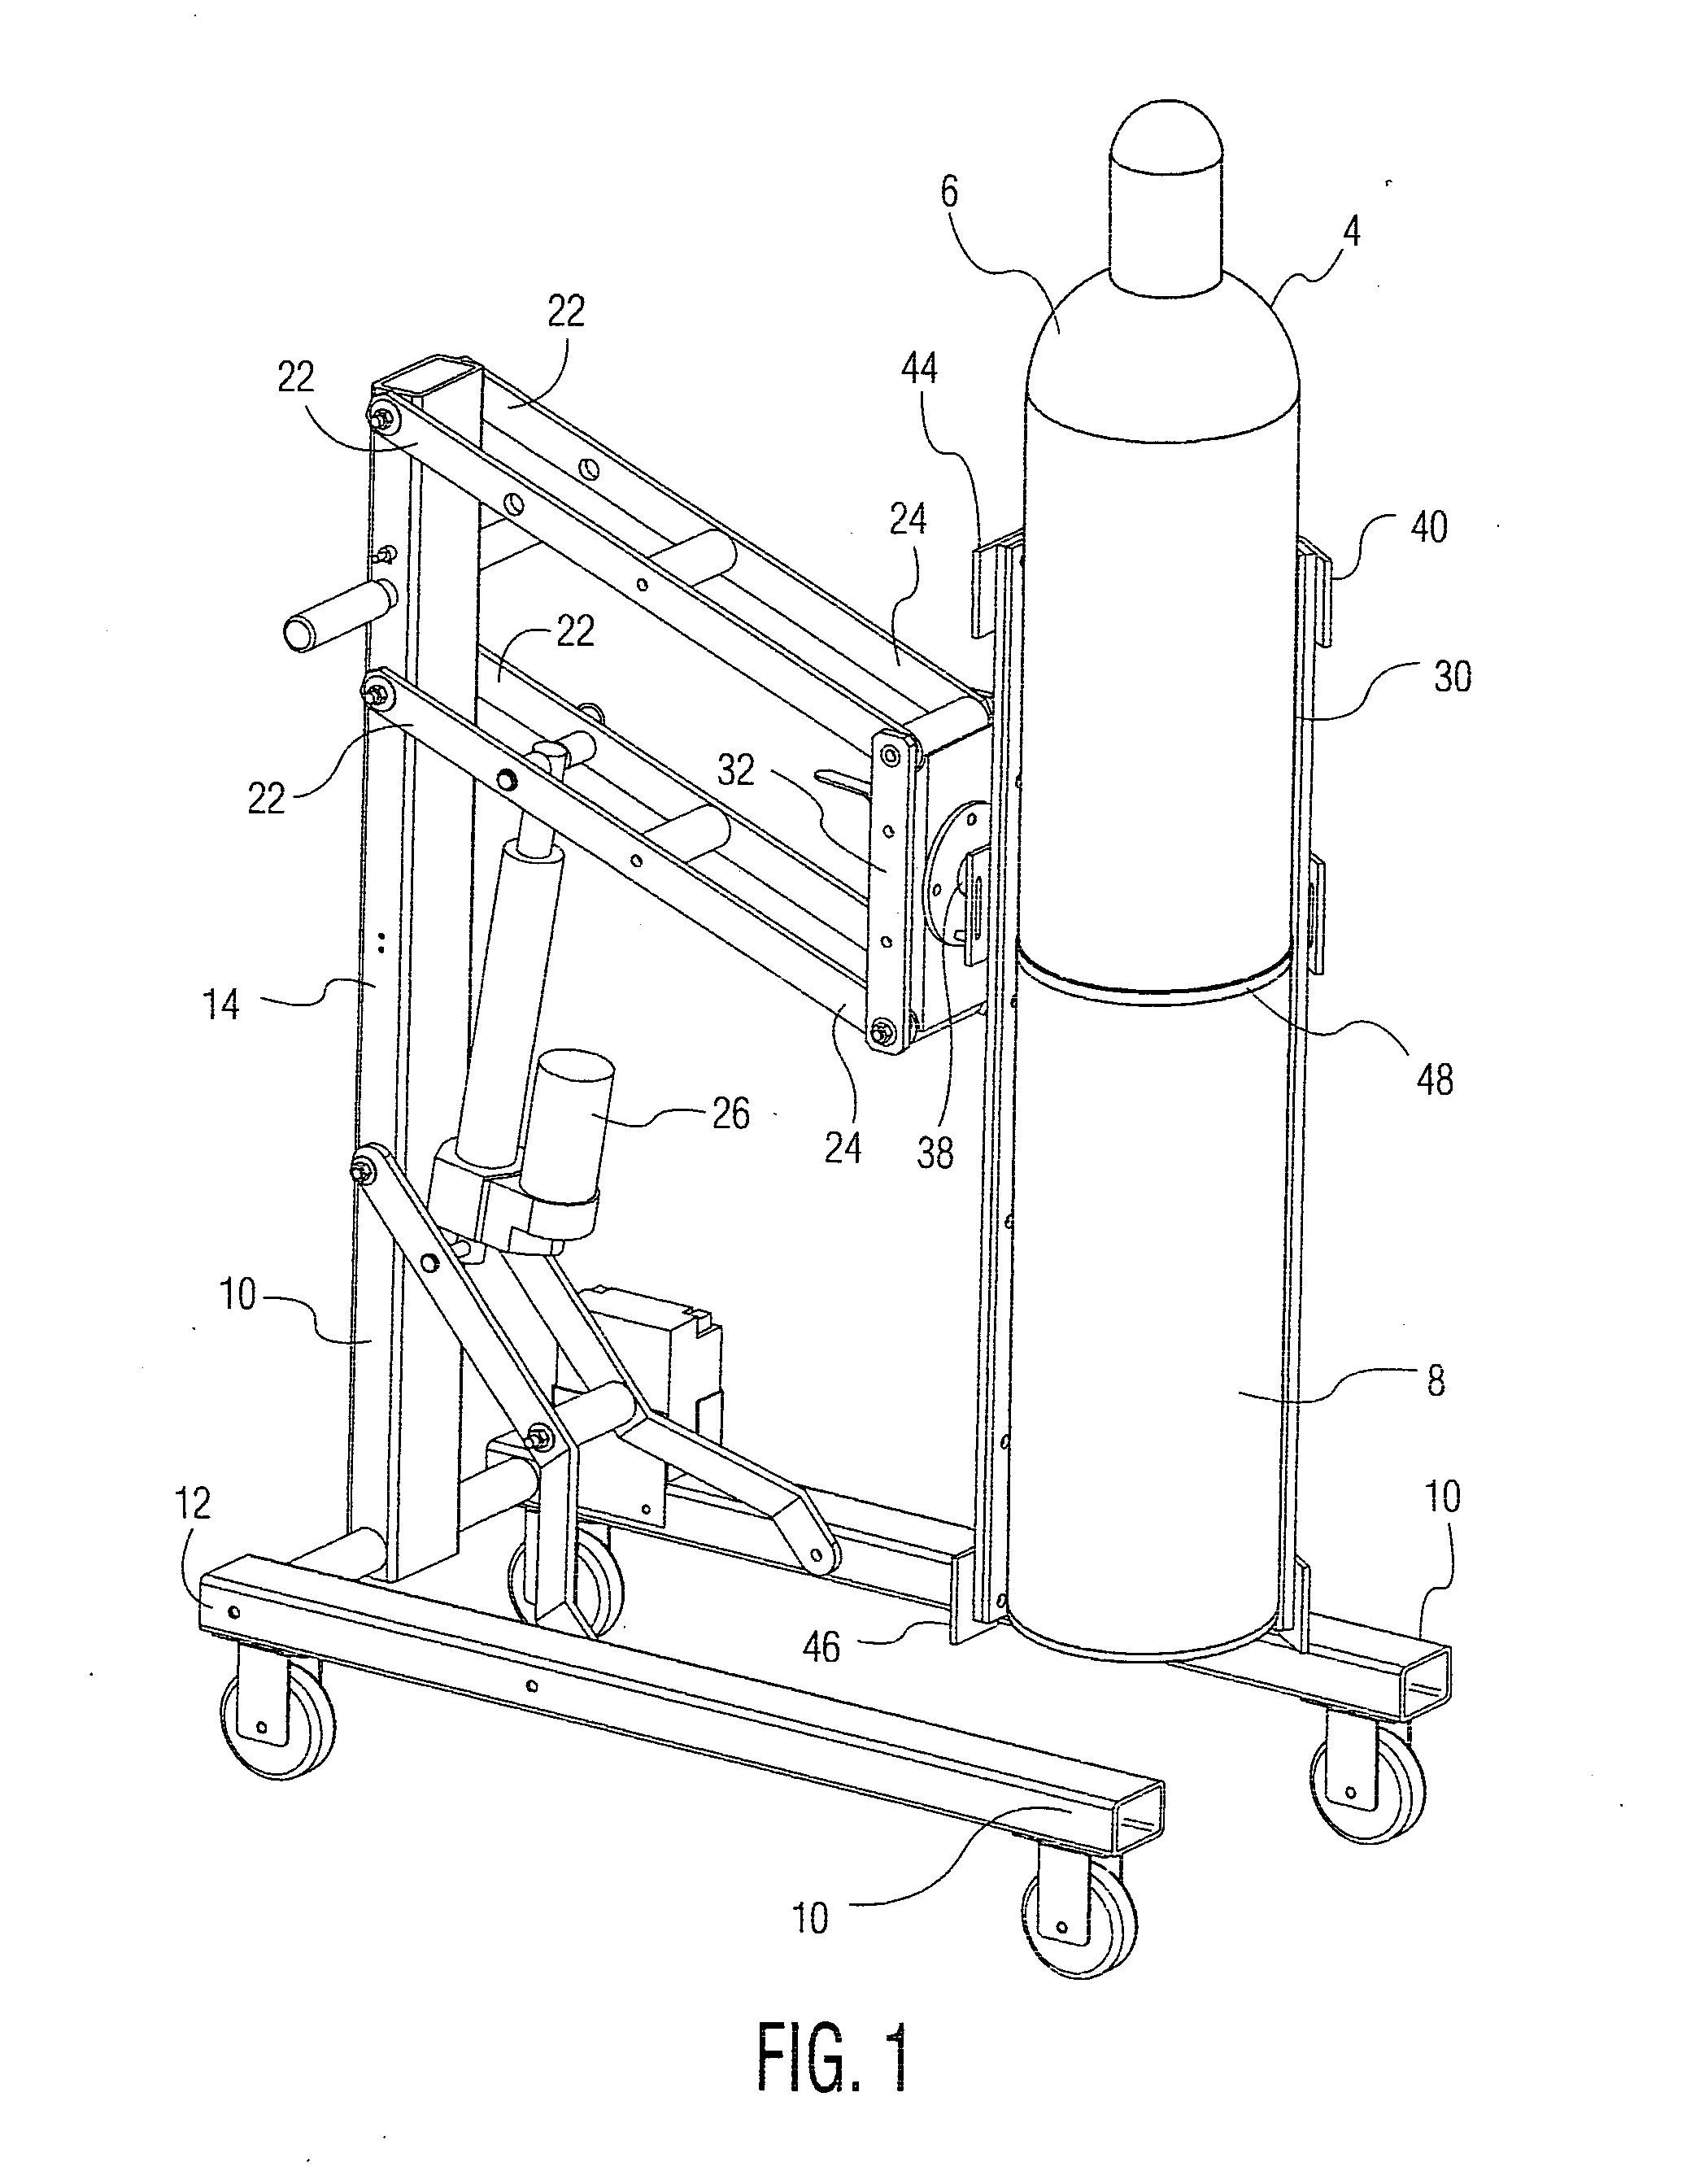 Tank Handling Apparatus for use Lifting, Supporting and Manipulating Cylindrical Tanks